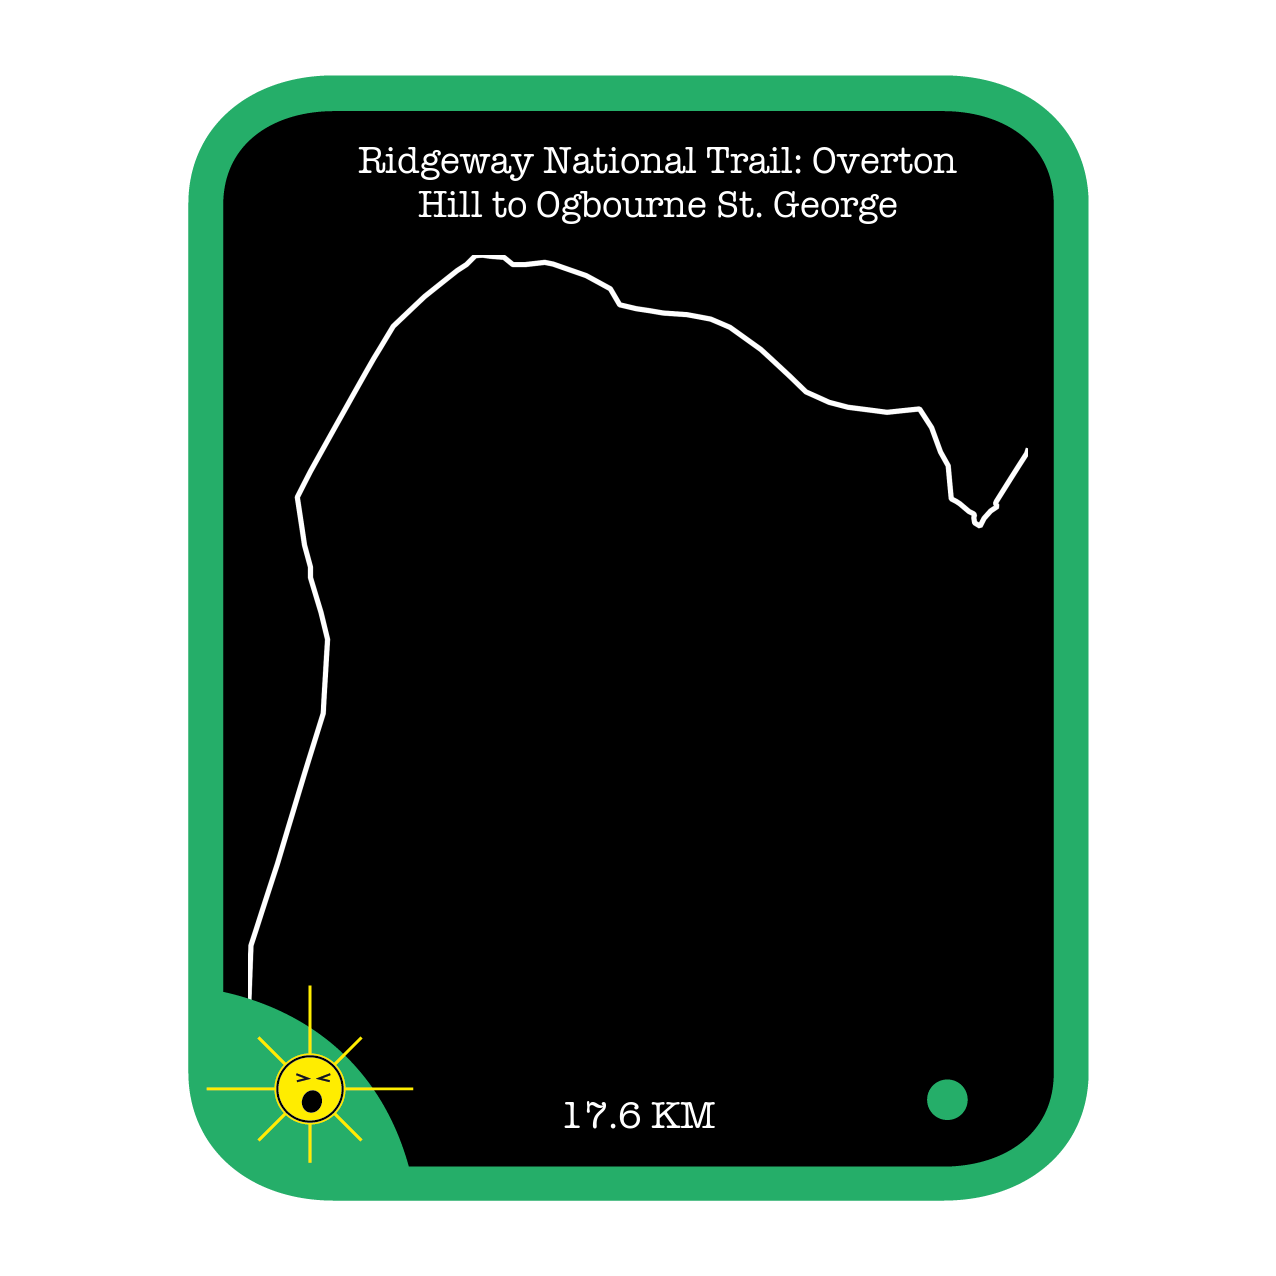 Ridgeway National Trail: Overton Hill to Ogbourne St. George